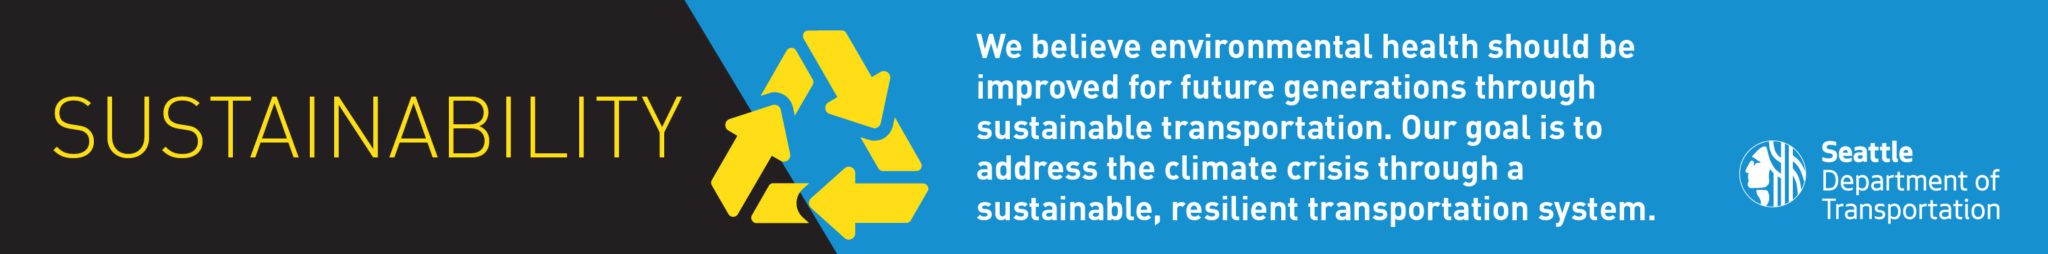 Graphic highlighting Sustainability as one of SDOT's core values and goals. The graphic includes black and blue background, the word "Sustainability", and a brief description, as well as a yellow recycling icon and the SDOT logo.